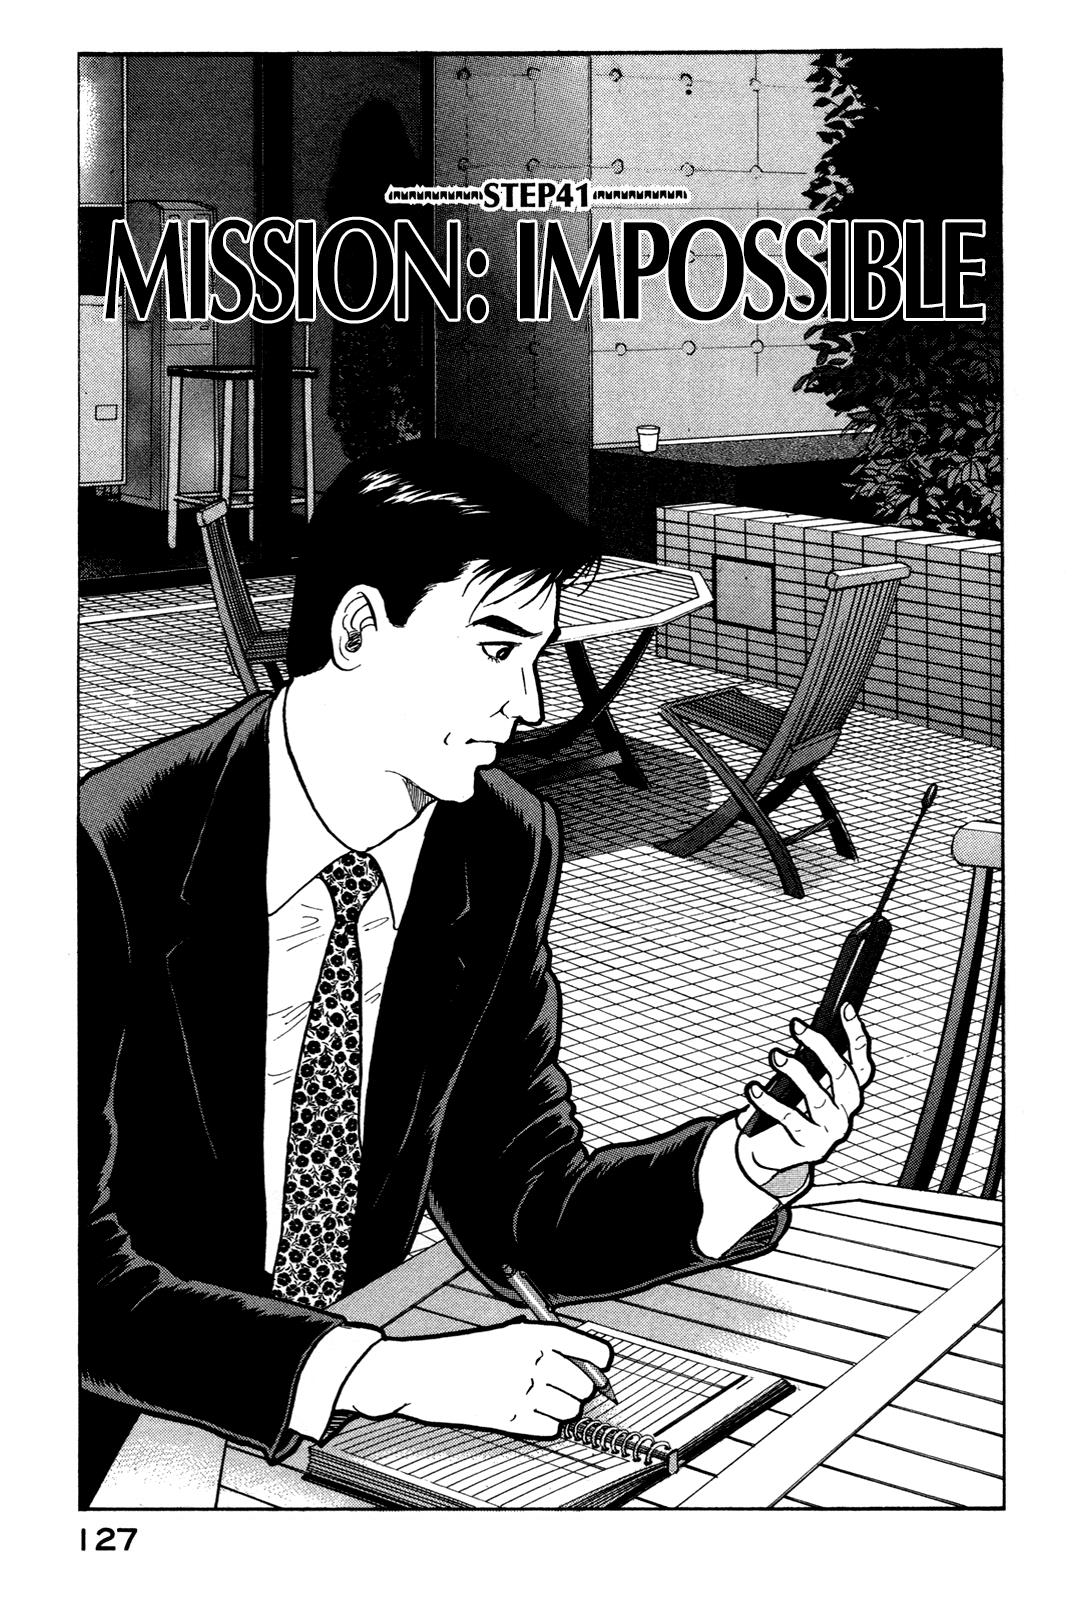 Division Chief Shima Kōsaku Vol.4 Chapter 41: Mission: Impossible - Picture 1